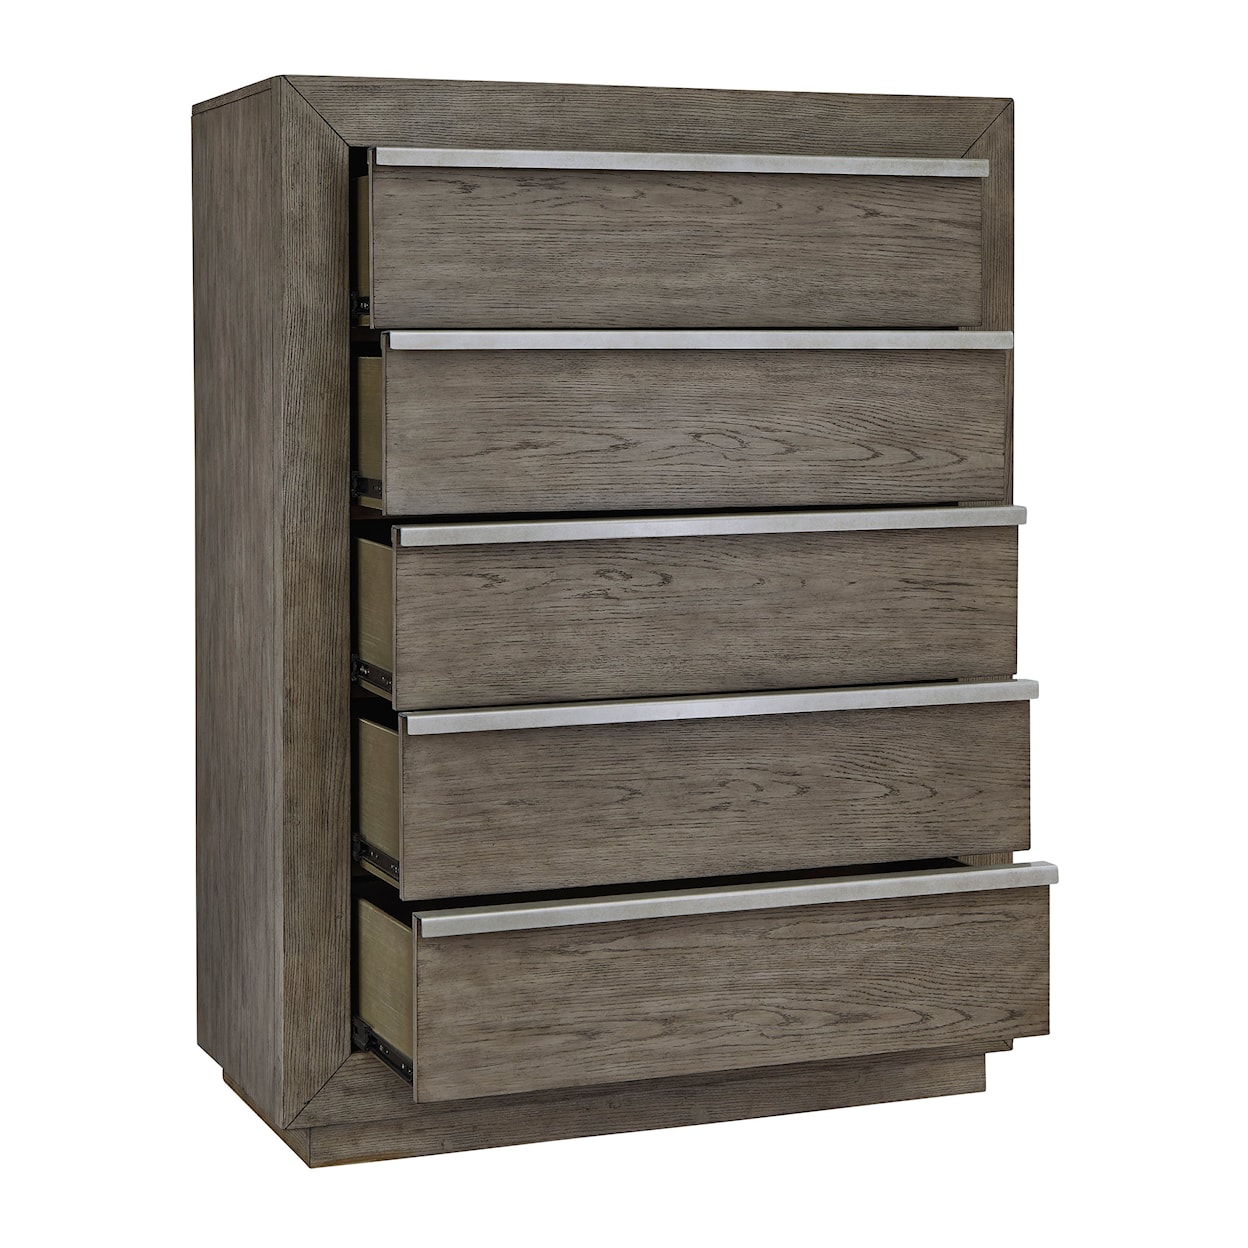 Ashley Furniture Benchcraft Anibecca Chest of Drawers